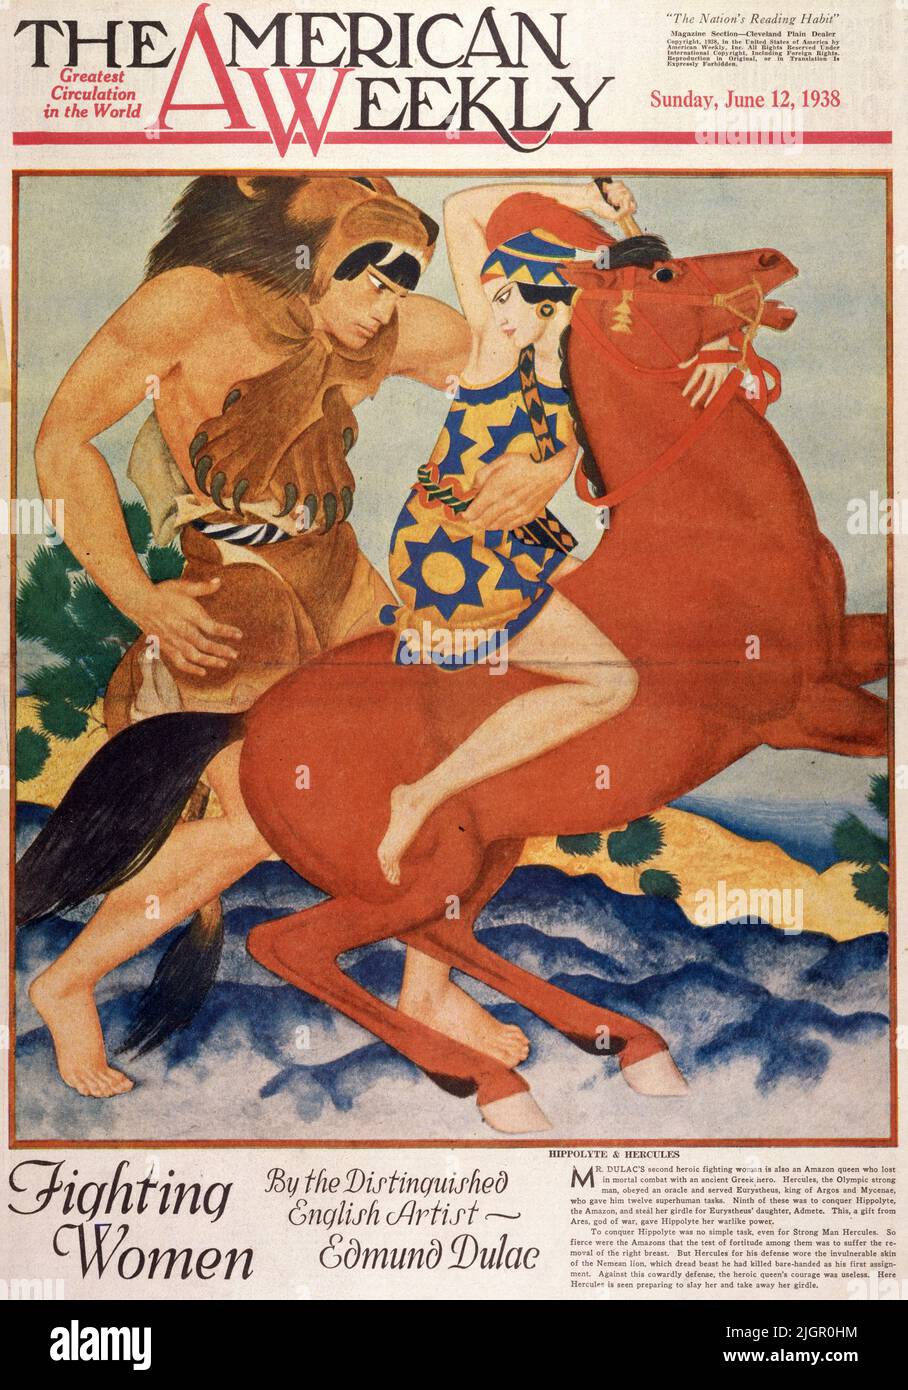 Hippolyte and Hercules published June 12,1938 in the American Weekly Sunday magazine painted by Edmund Dulac.  Mr. Dulac’s second heroic fighting woman is also an Amazon Queen who lost in mortal combat to an ancient Greek hero. Hercules, the Olympic strong man, obeyed an oracle and served Eurystheus, king of Argos and Mycenae, who gave him twelve superhuman tasks. Ninth of these was to conquer Hippolyte, the Amazon, and steal her girdle for Eurystheus’s daughter Admete. This, a gift from Ares, the god of war, gave Hippolyte her warlike power. Stock Photo